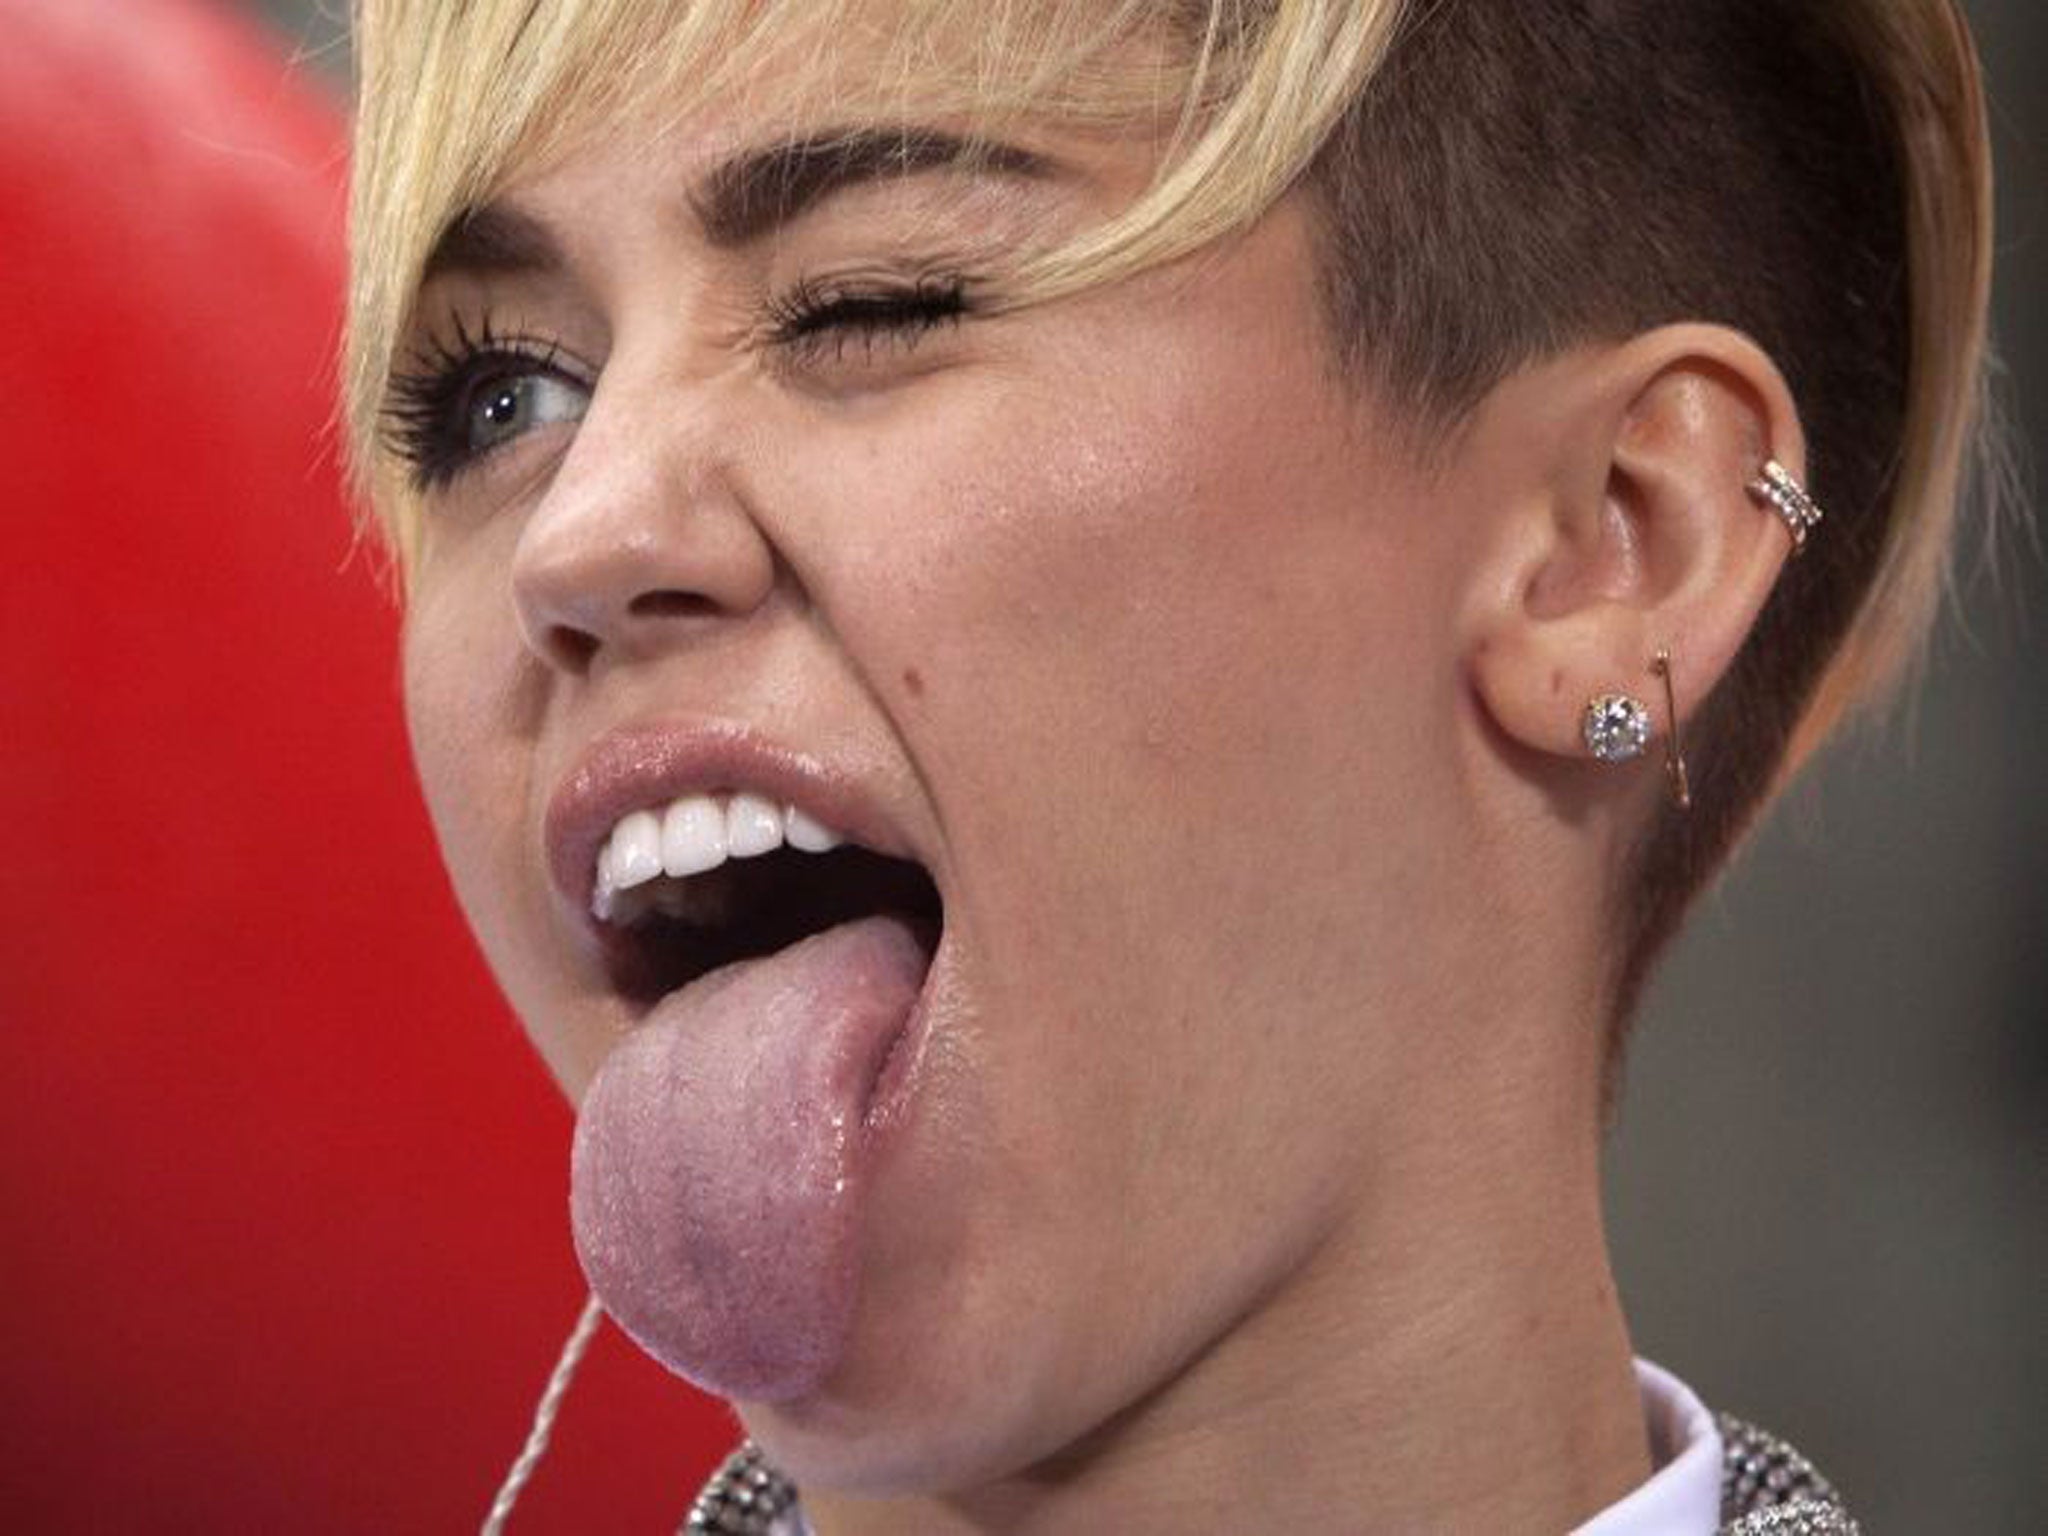 Miley Cyrus Parody - From Sinead O'Connor and Annie Lennox to Miley Cyrus and ...